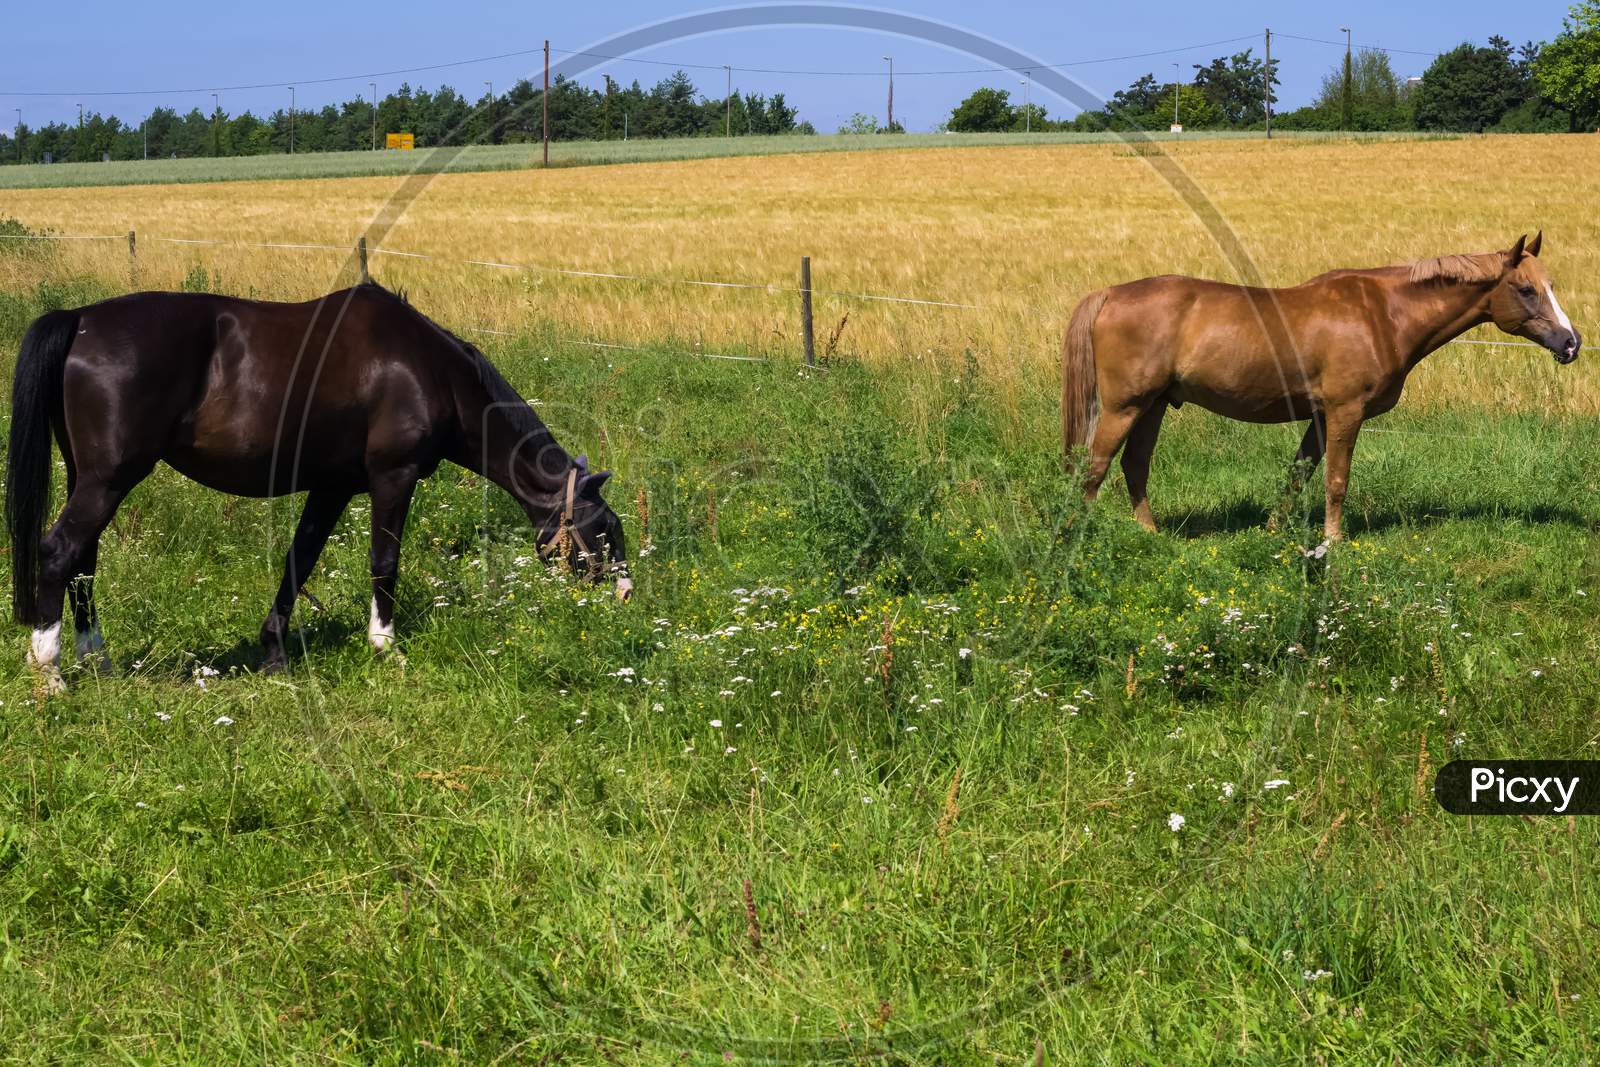 Two Horses Were Eating And Relaxing On A Hot Summer Day